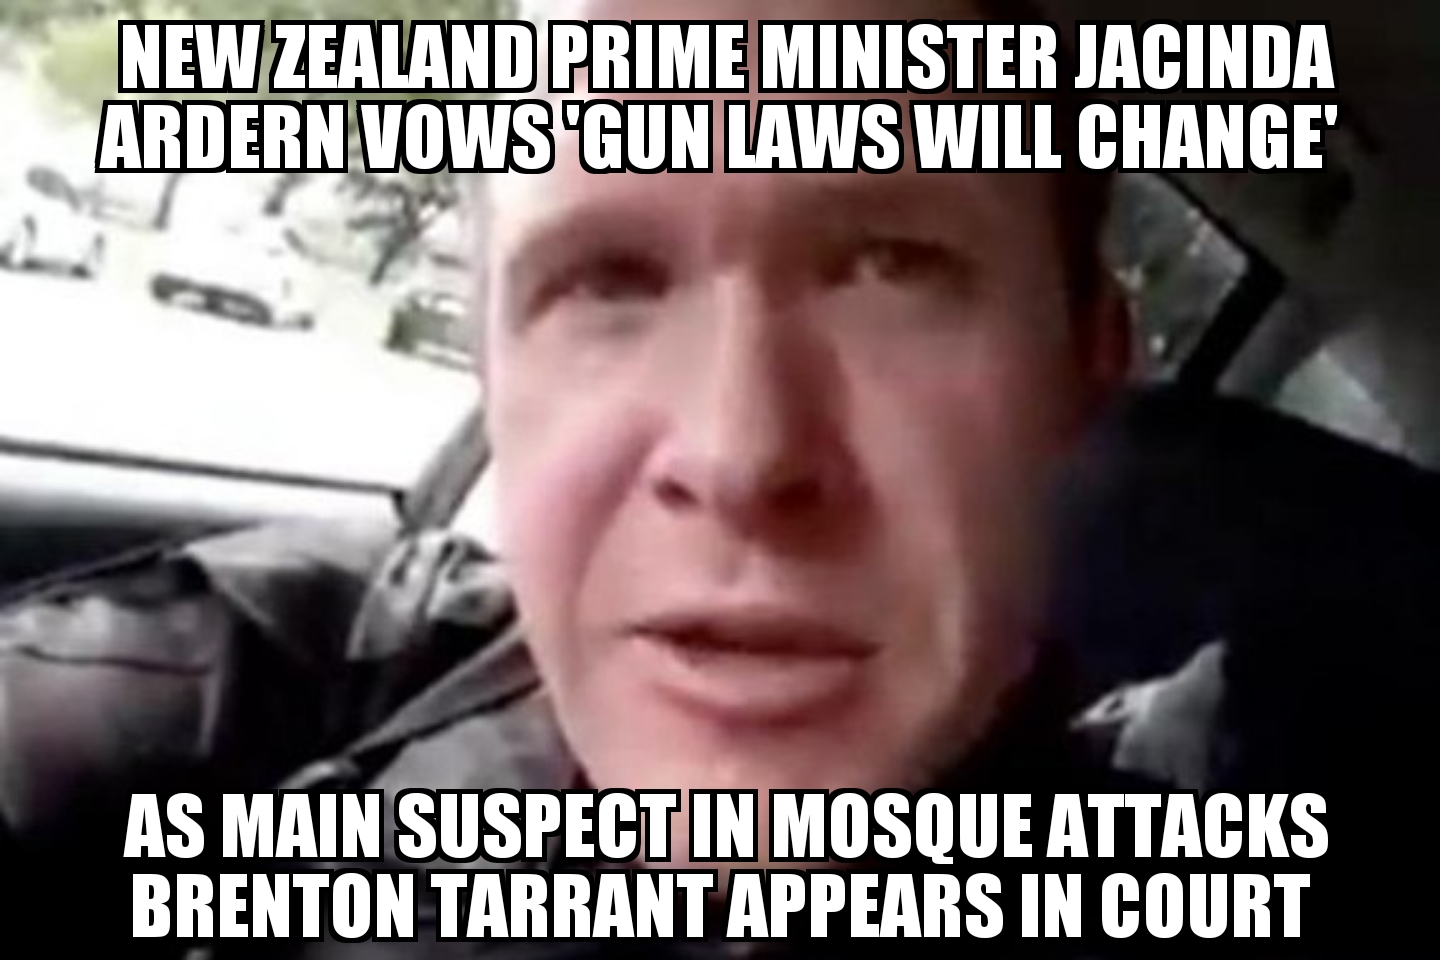 Brenton Tarrant appears in court following Christchurch mosque shooting